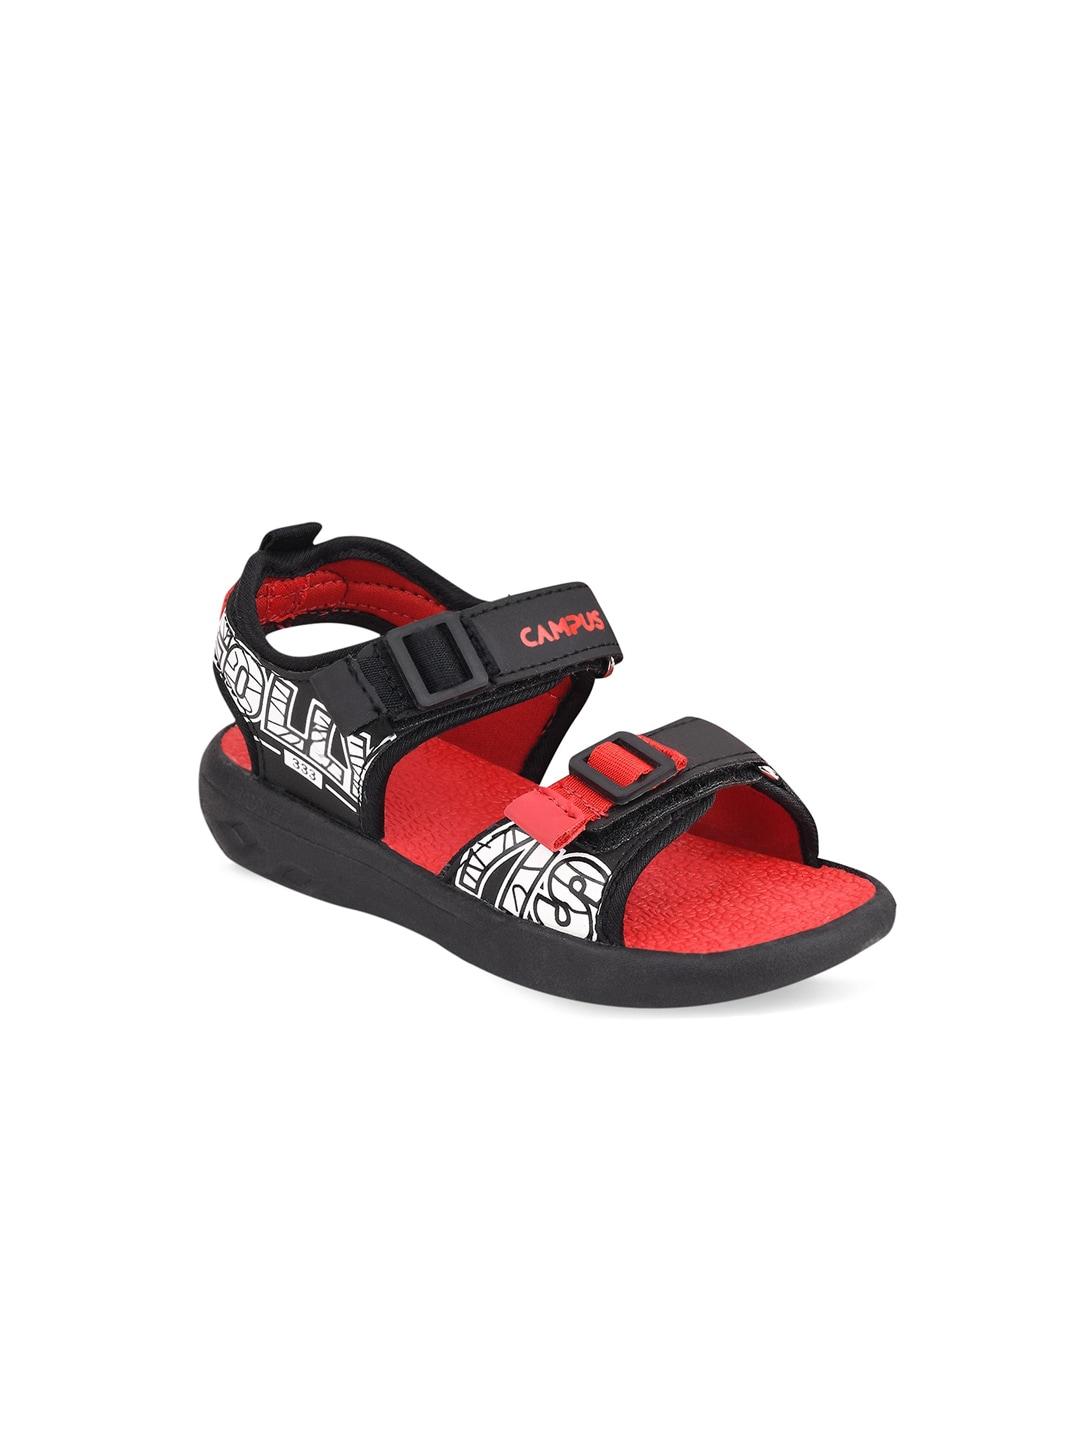 campus-kids-black-&-red-solid-sports-sandals